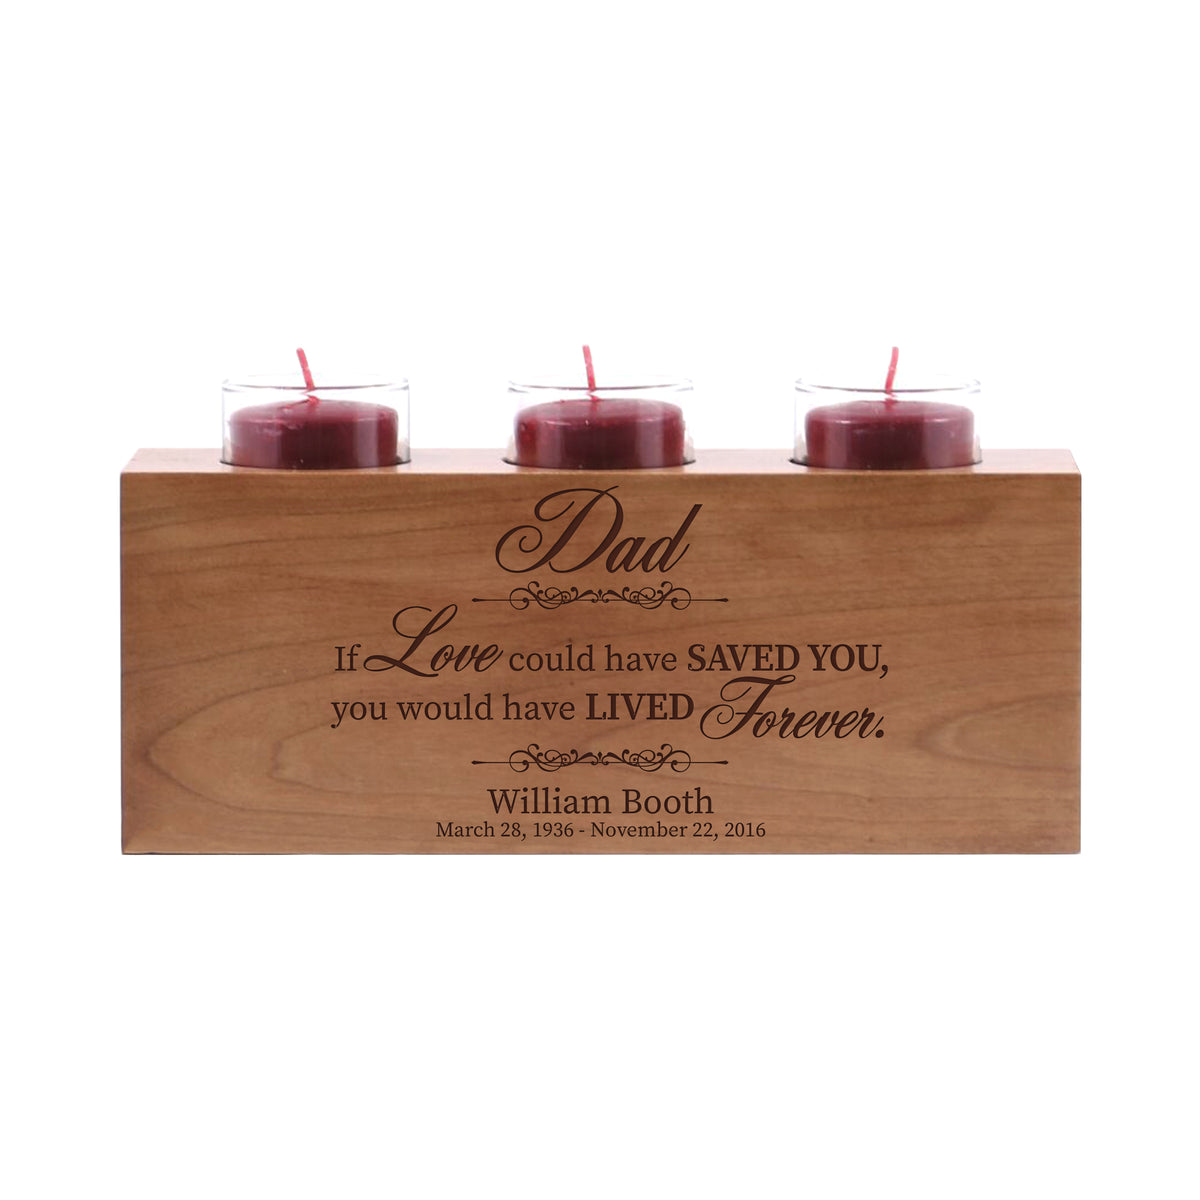 LifeSong Milestones Personalized Memorial Sympathy 3 Votive Candle Holder - Dad, If Love Could Engraved Tea Light Candle Loss of Loved One Gift - 10” x 4” x 4”.